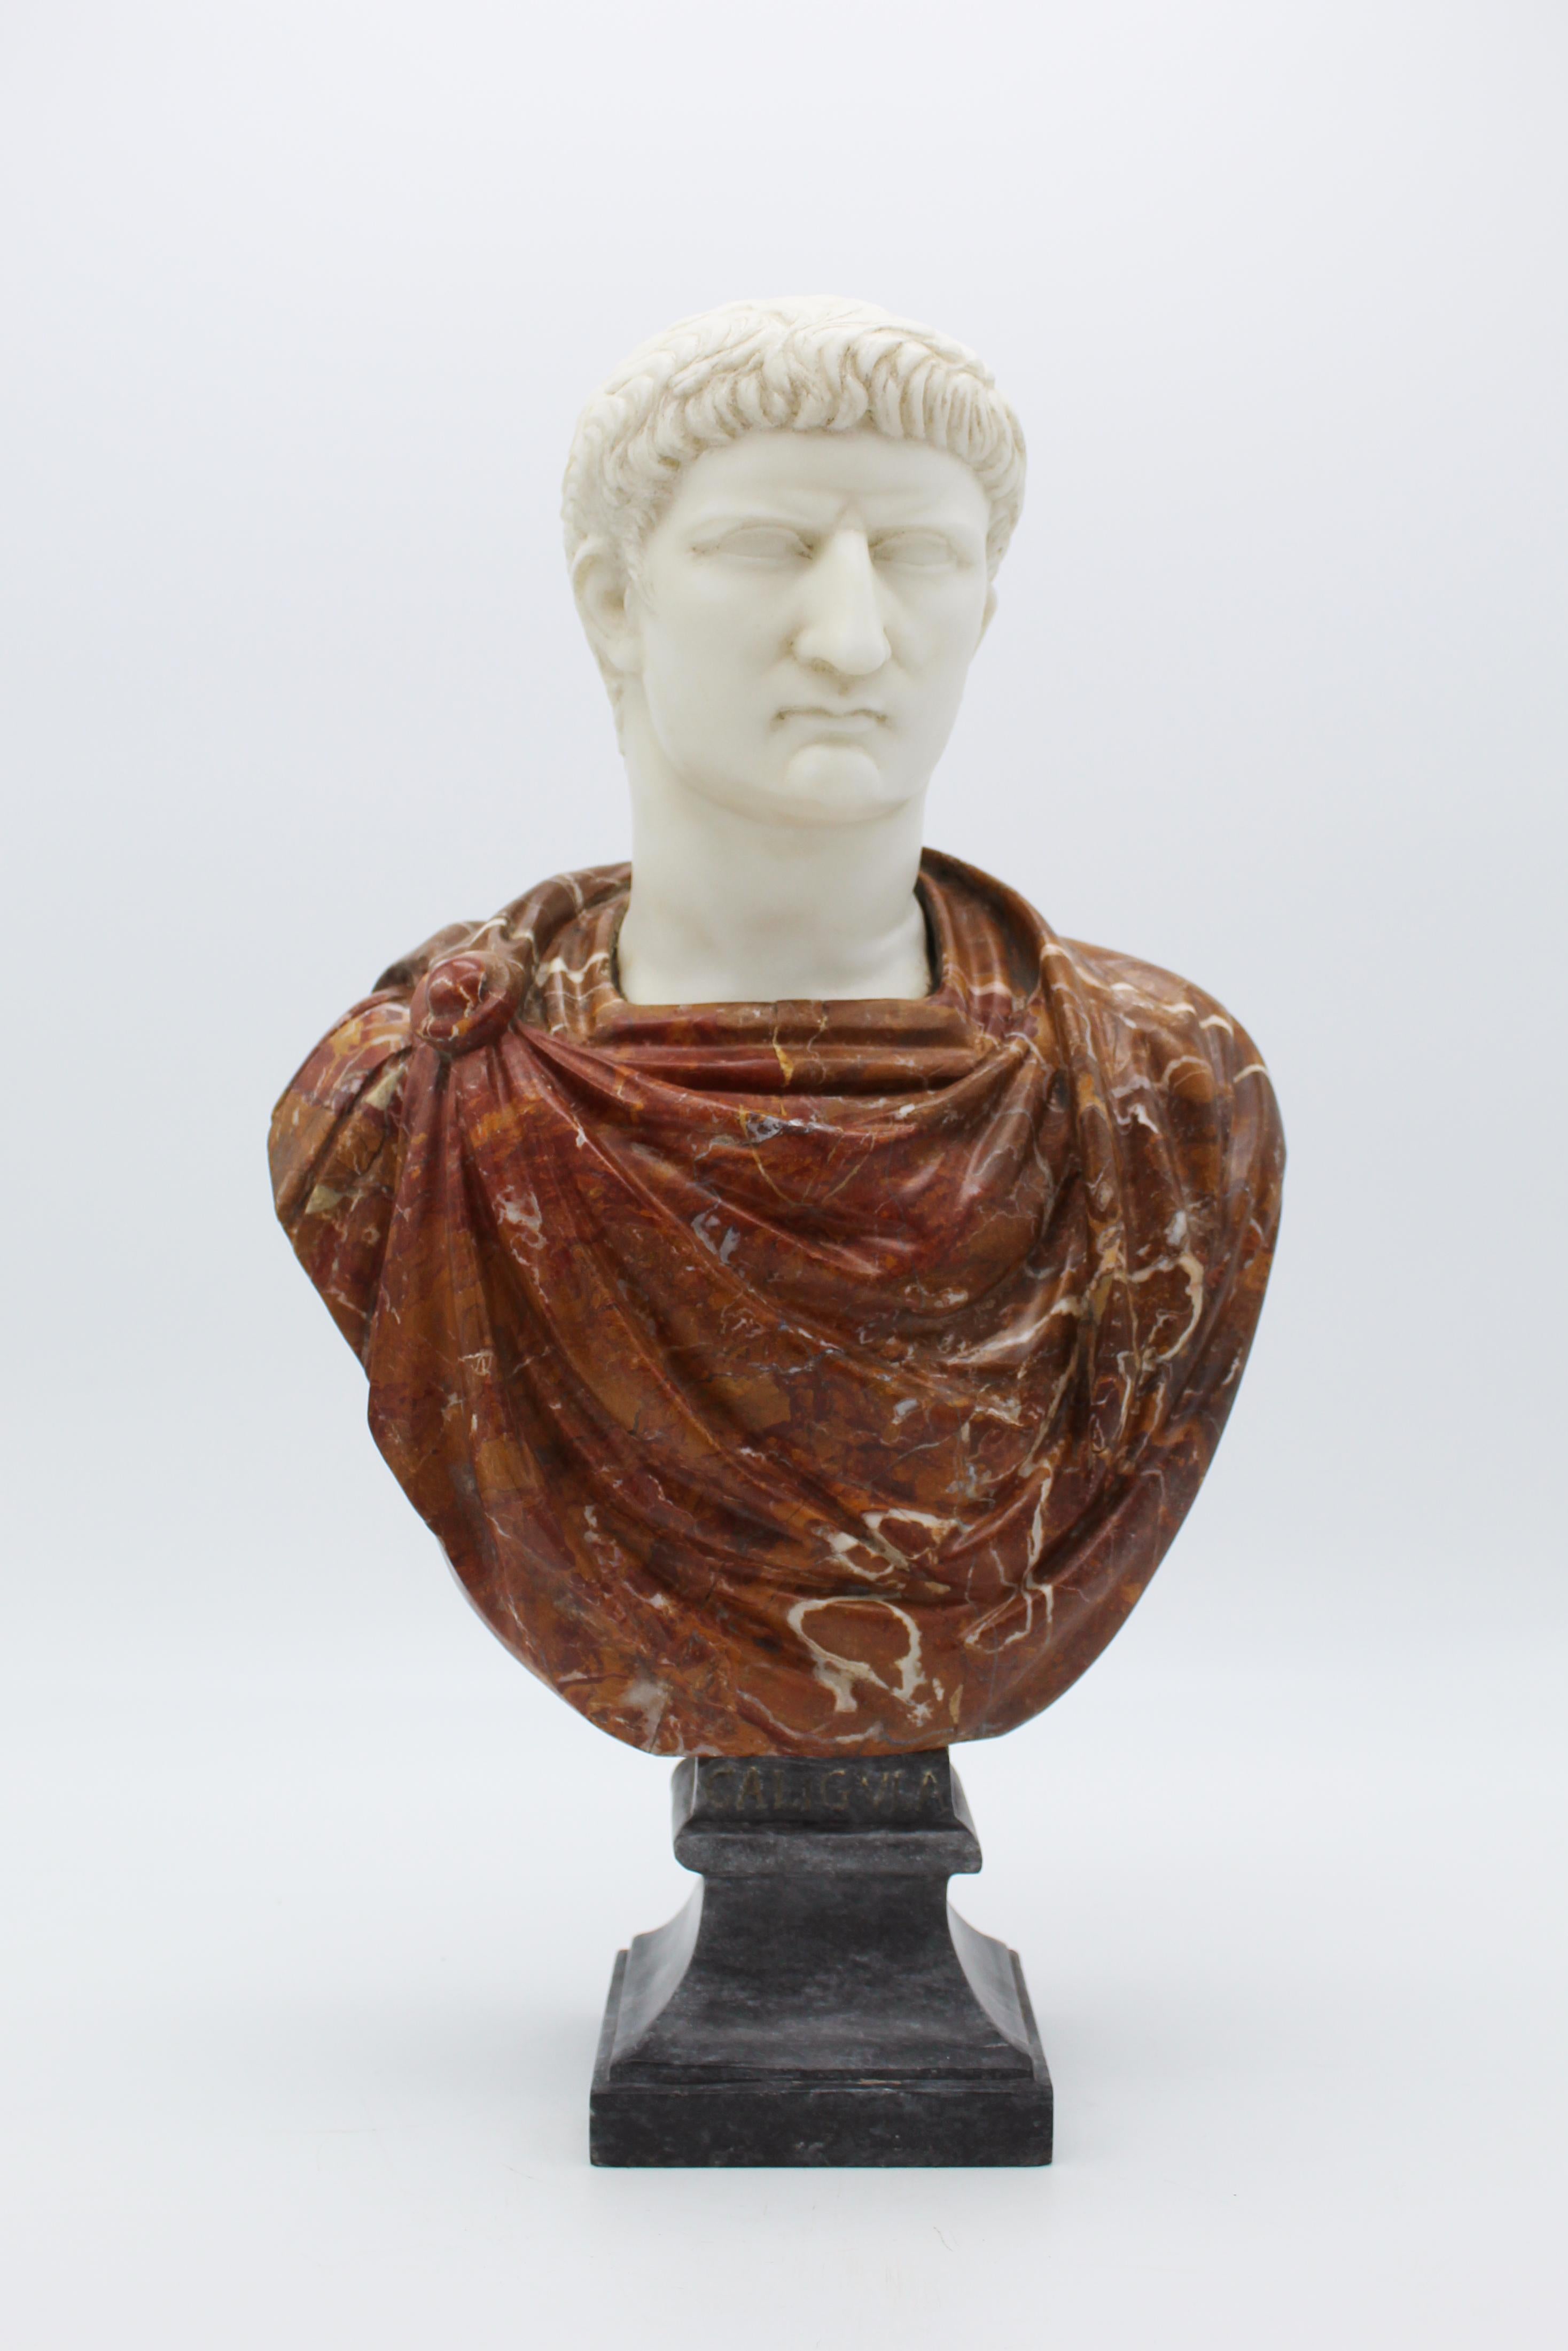 20th Century Italian Marble Sculpture Bust of Emperor Caligula By G.Pace 2